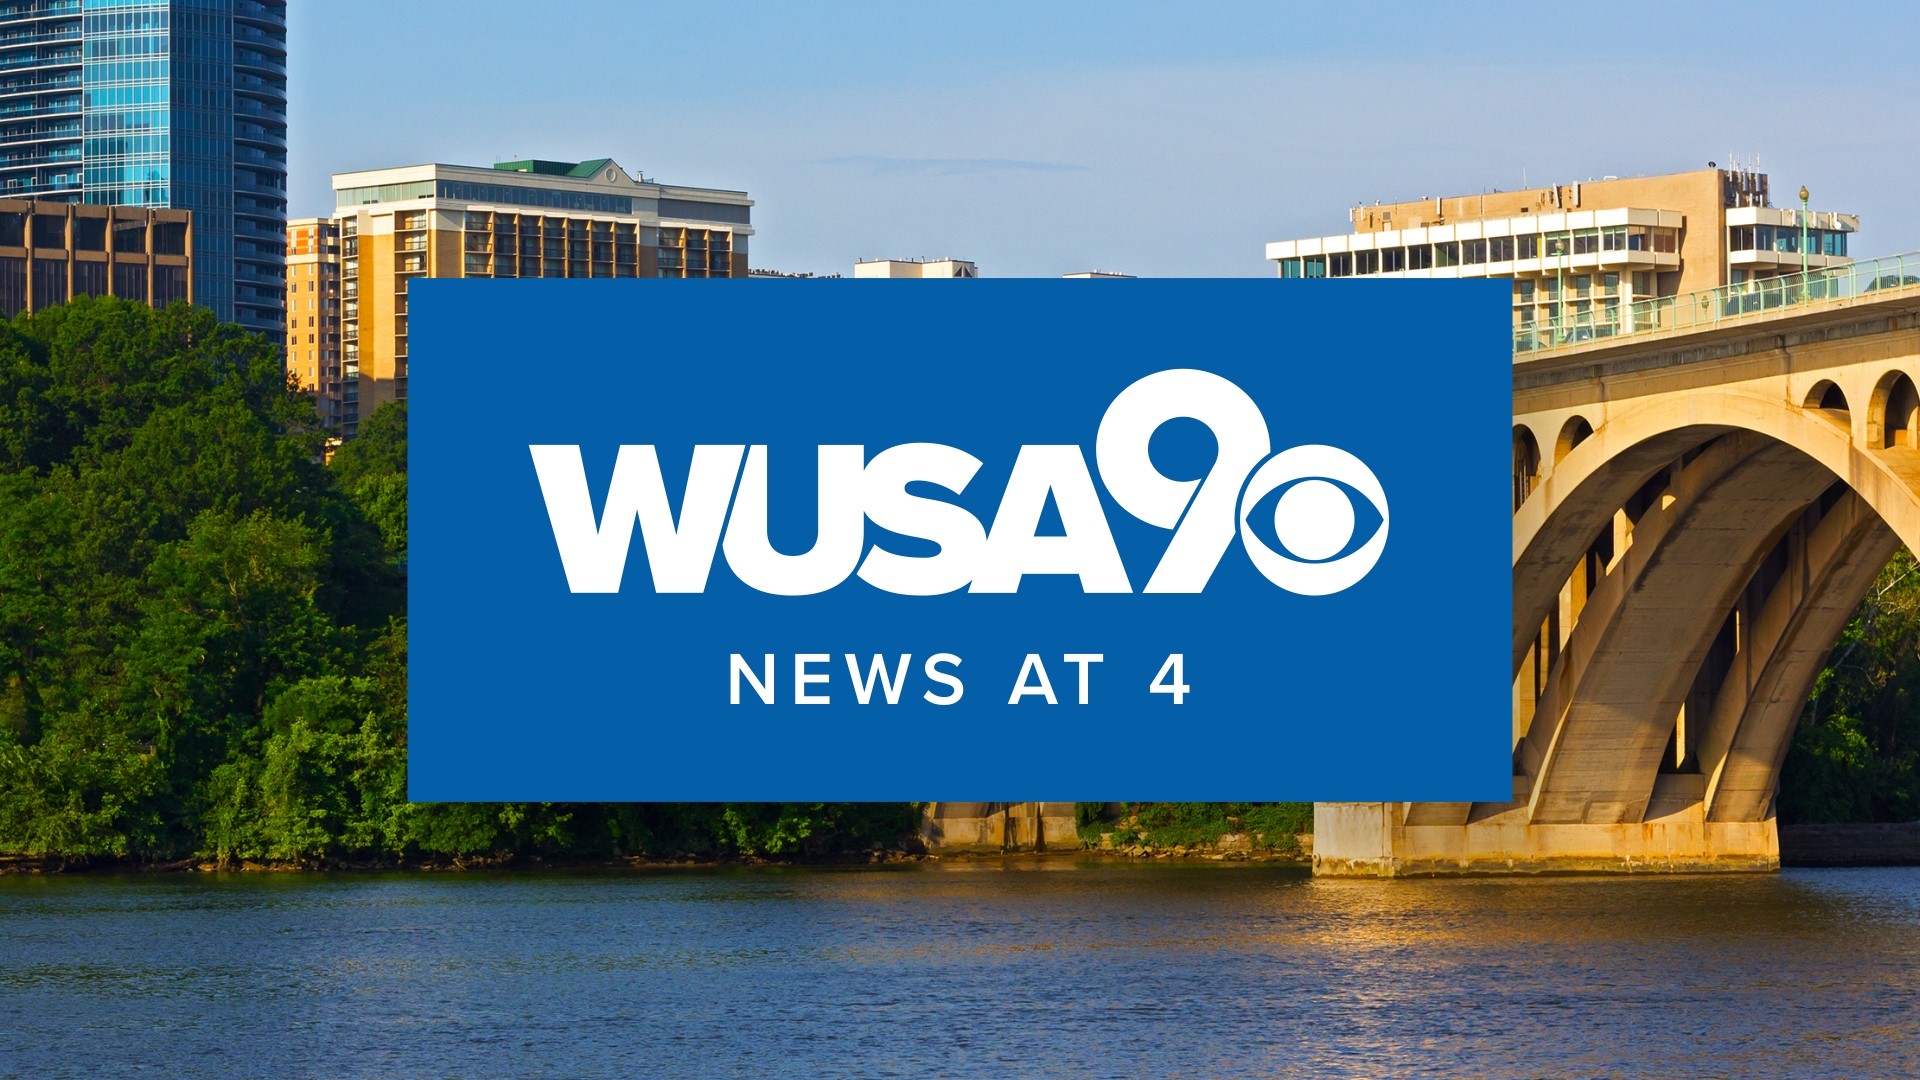 The WUSA9 News Team covers the day's major news and breaking stories affecting the Washington, D.C., area, with sports and the week's weather forecast.